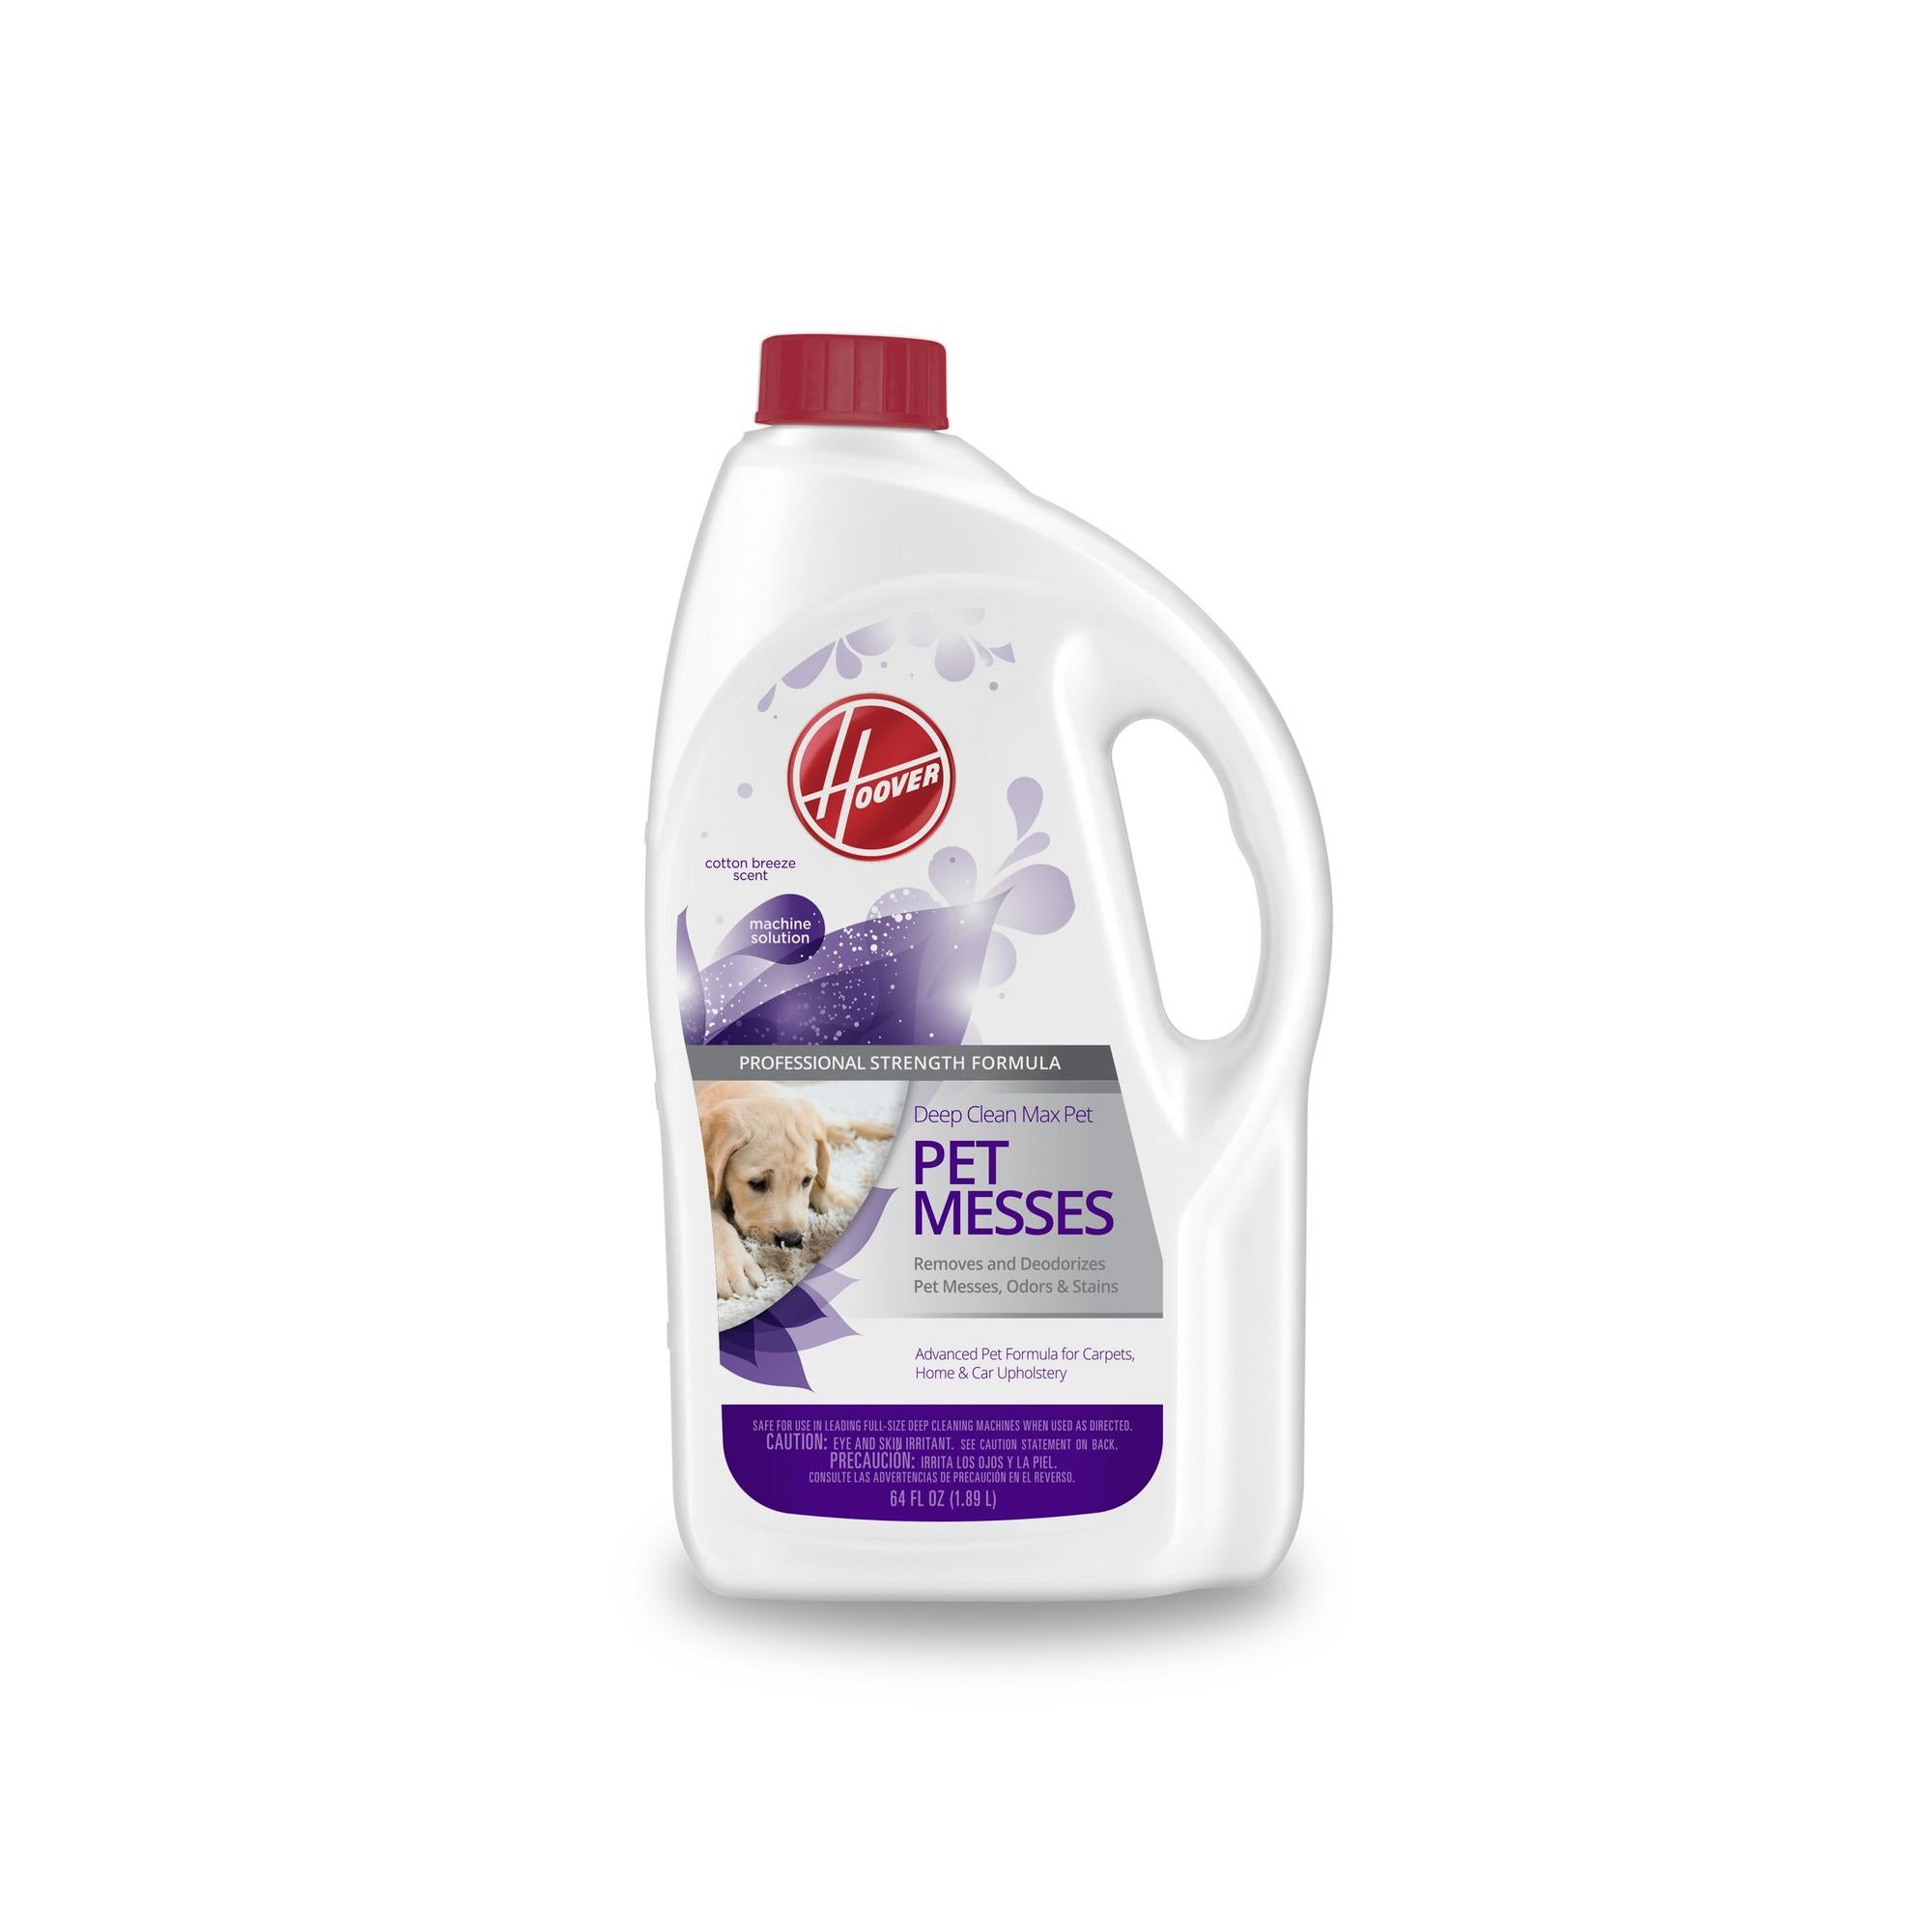 Pet cleaning. Pet messes Hoover. Carpet Cleaner solution. Professional Carpet Cleaning for Pets. Clean Pet.